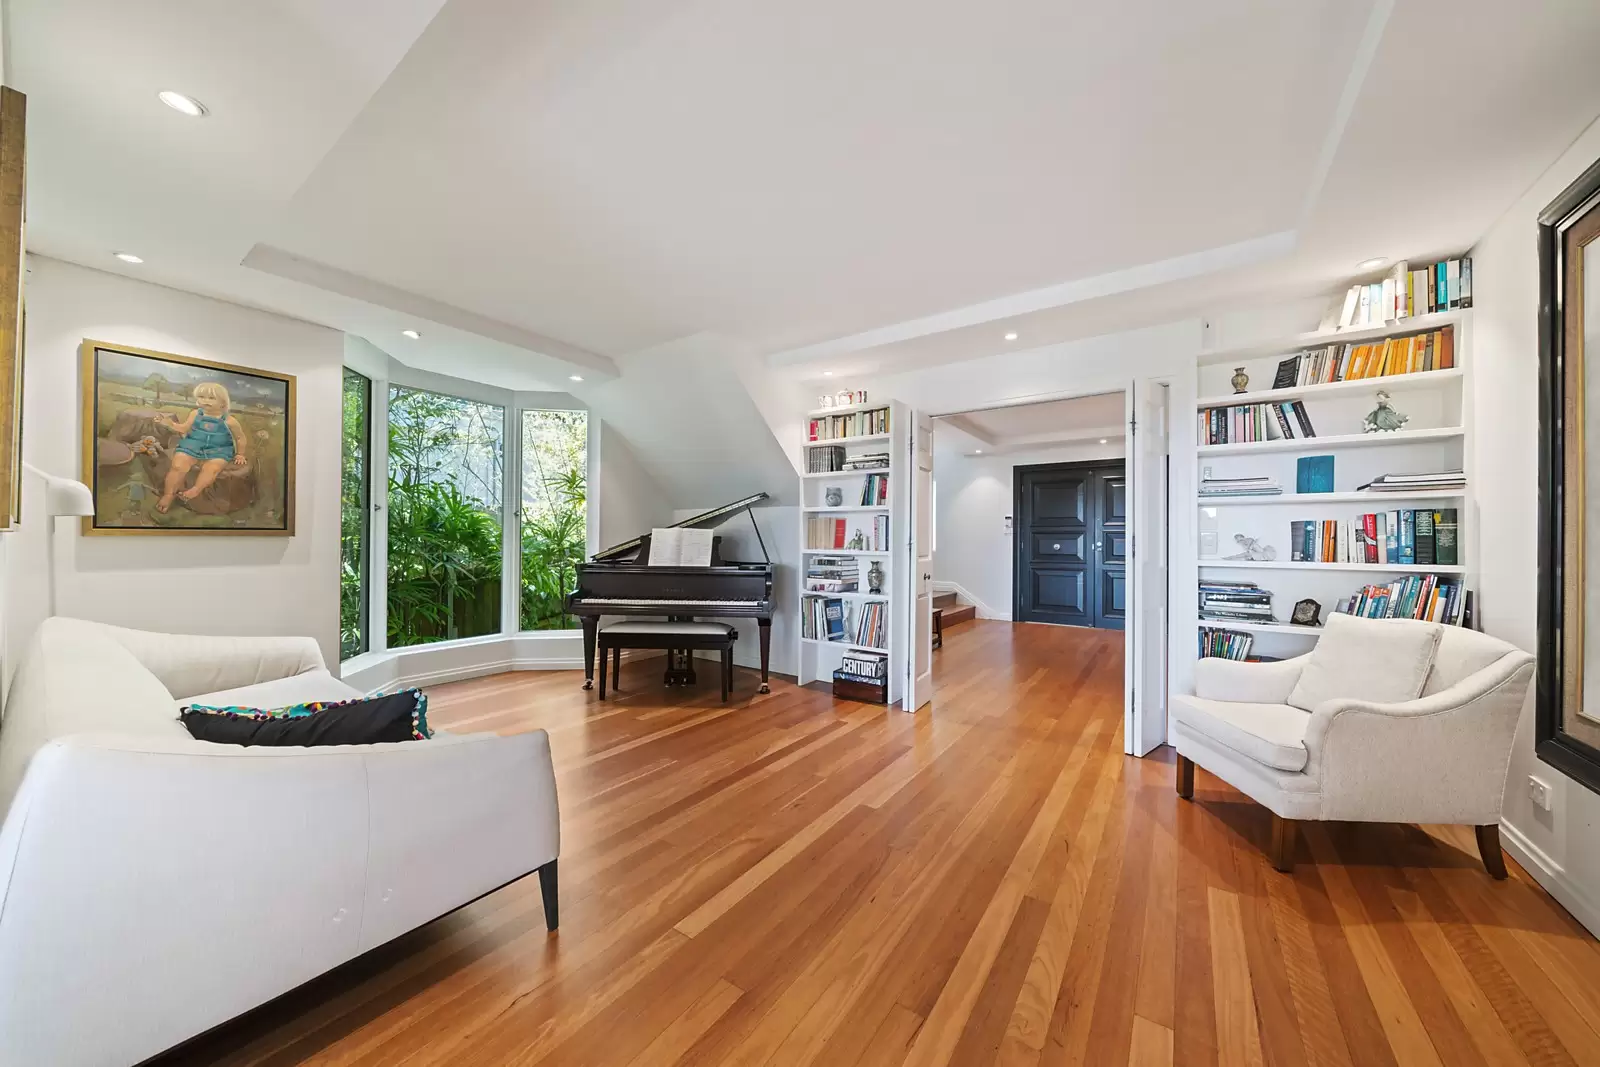 Photo #9: 18 Burrabirra Avenue, Vaucluse - Sold by Sydney Sotheby's International Realty